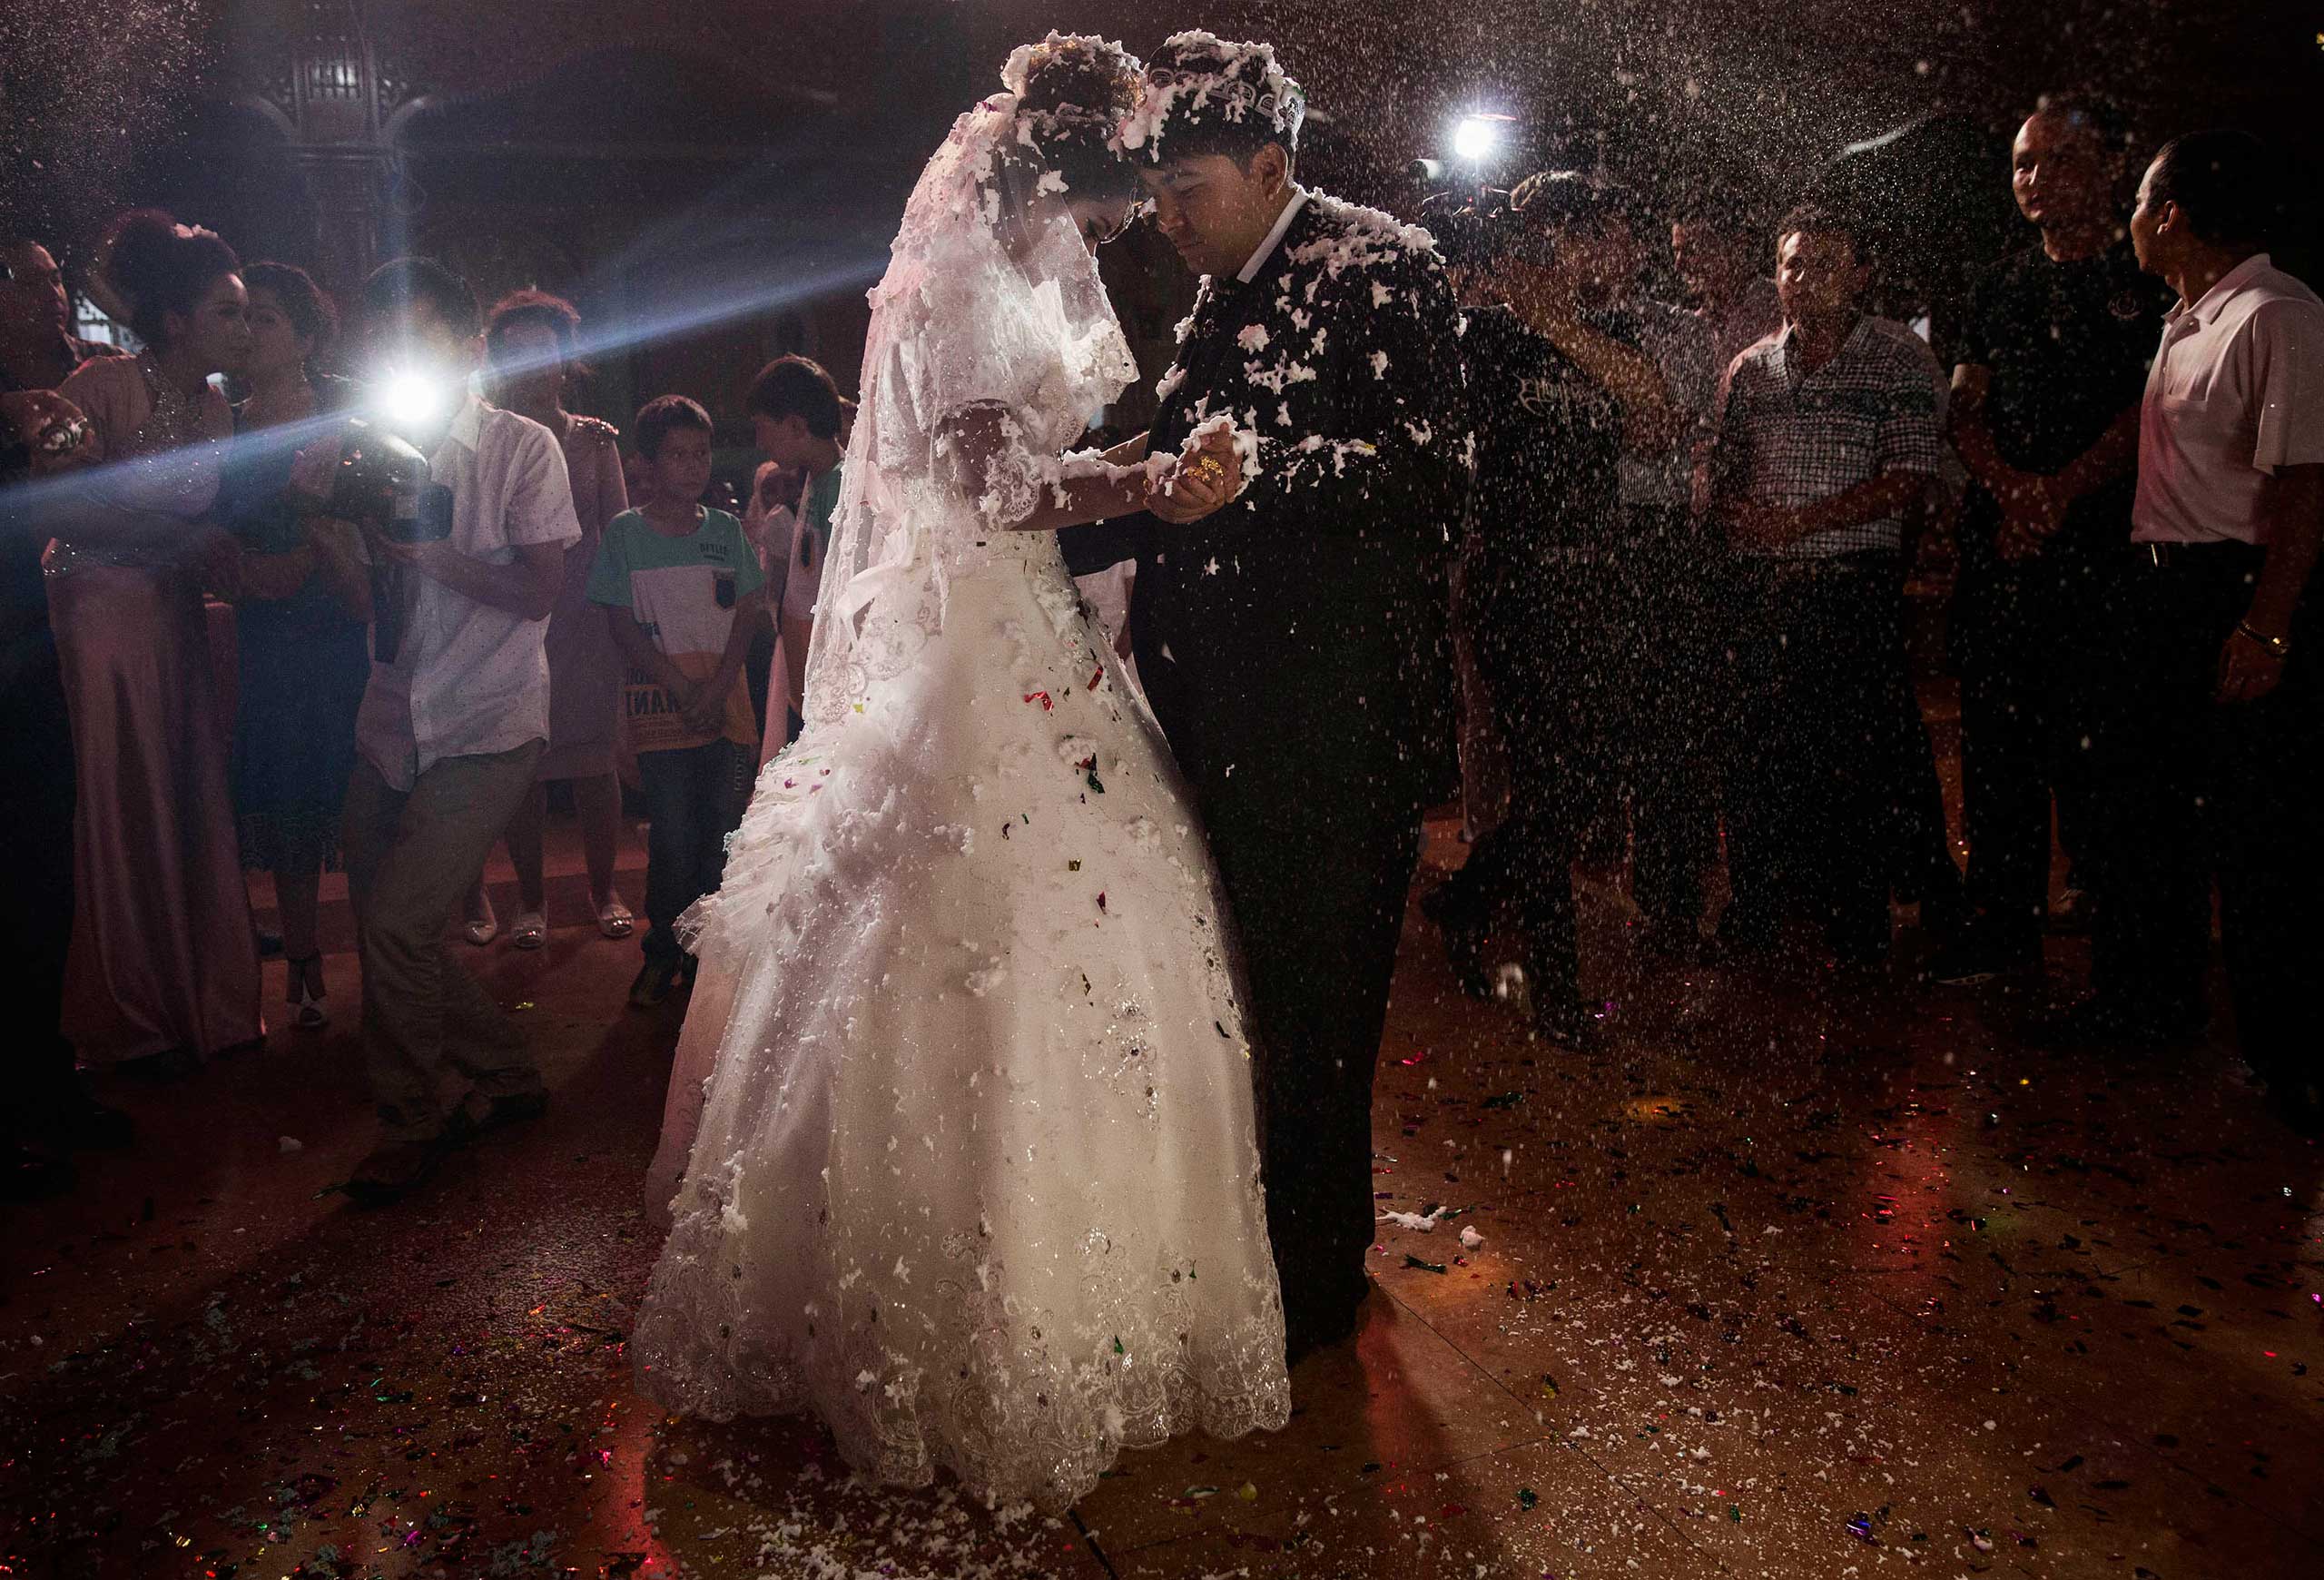 A Uighur couple have their first dance at their wedding celebration after being married in Kashgar, Xinjiang Province, China,  Aug. 2, 2014.